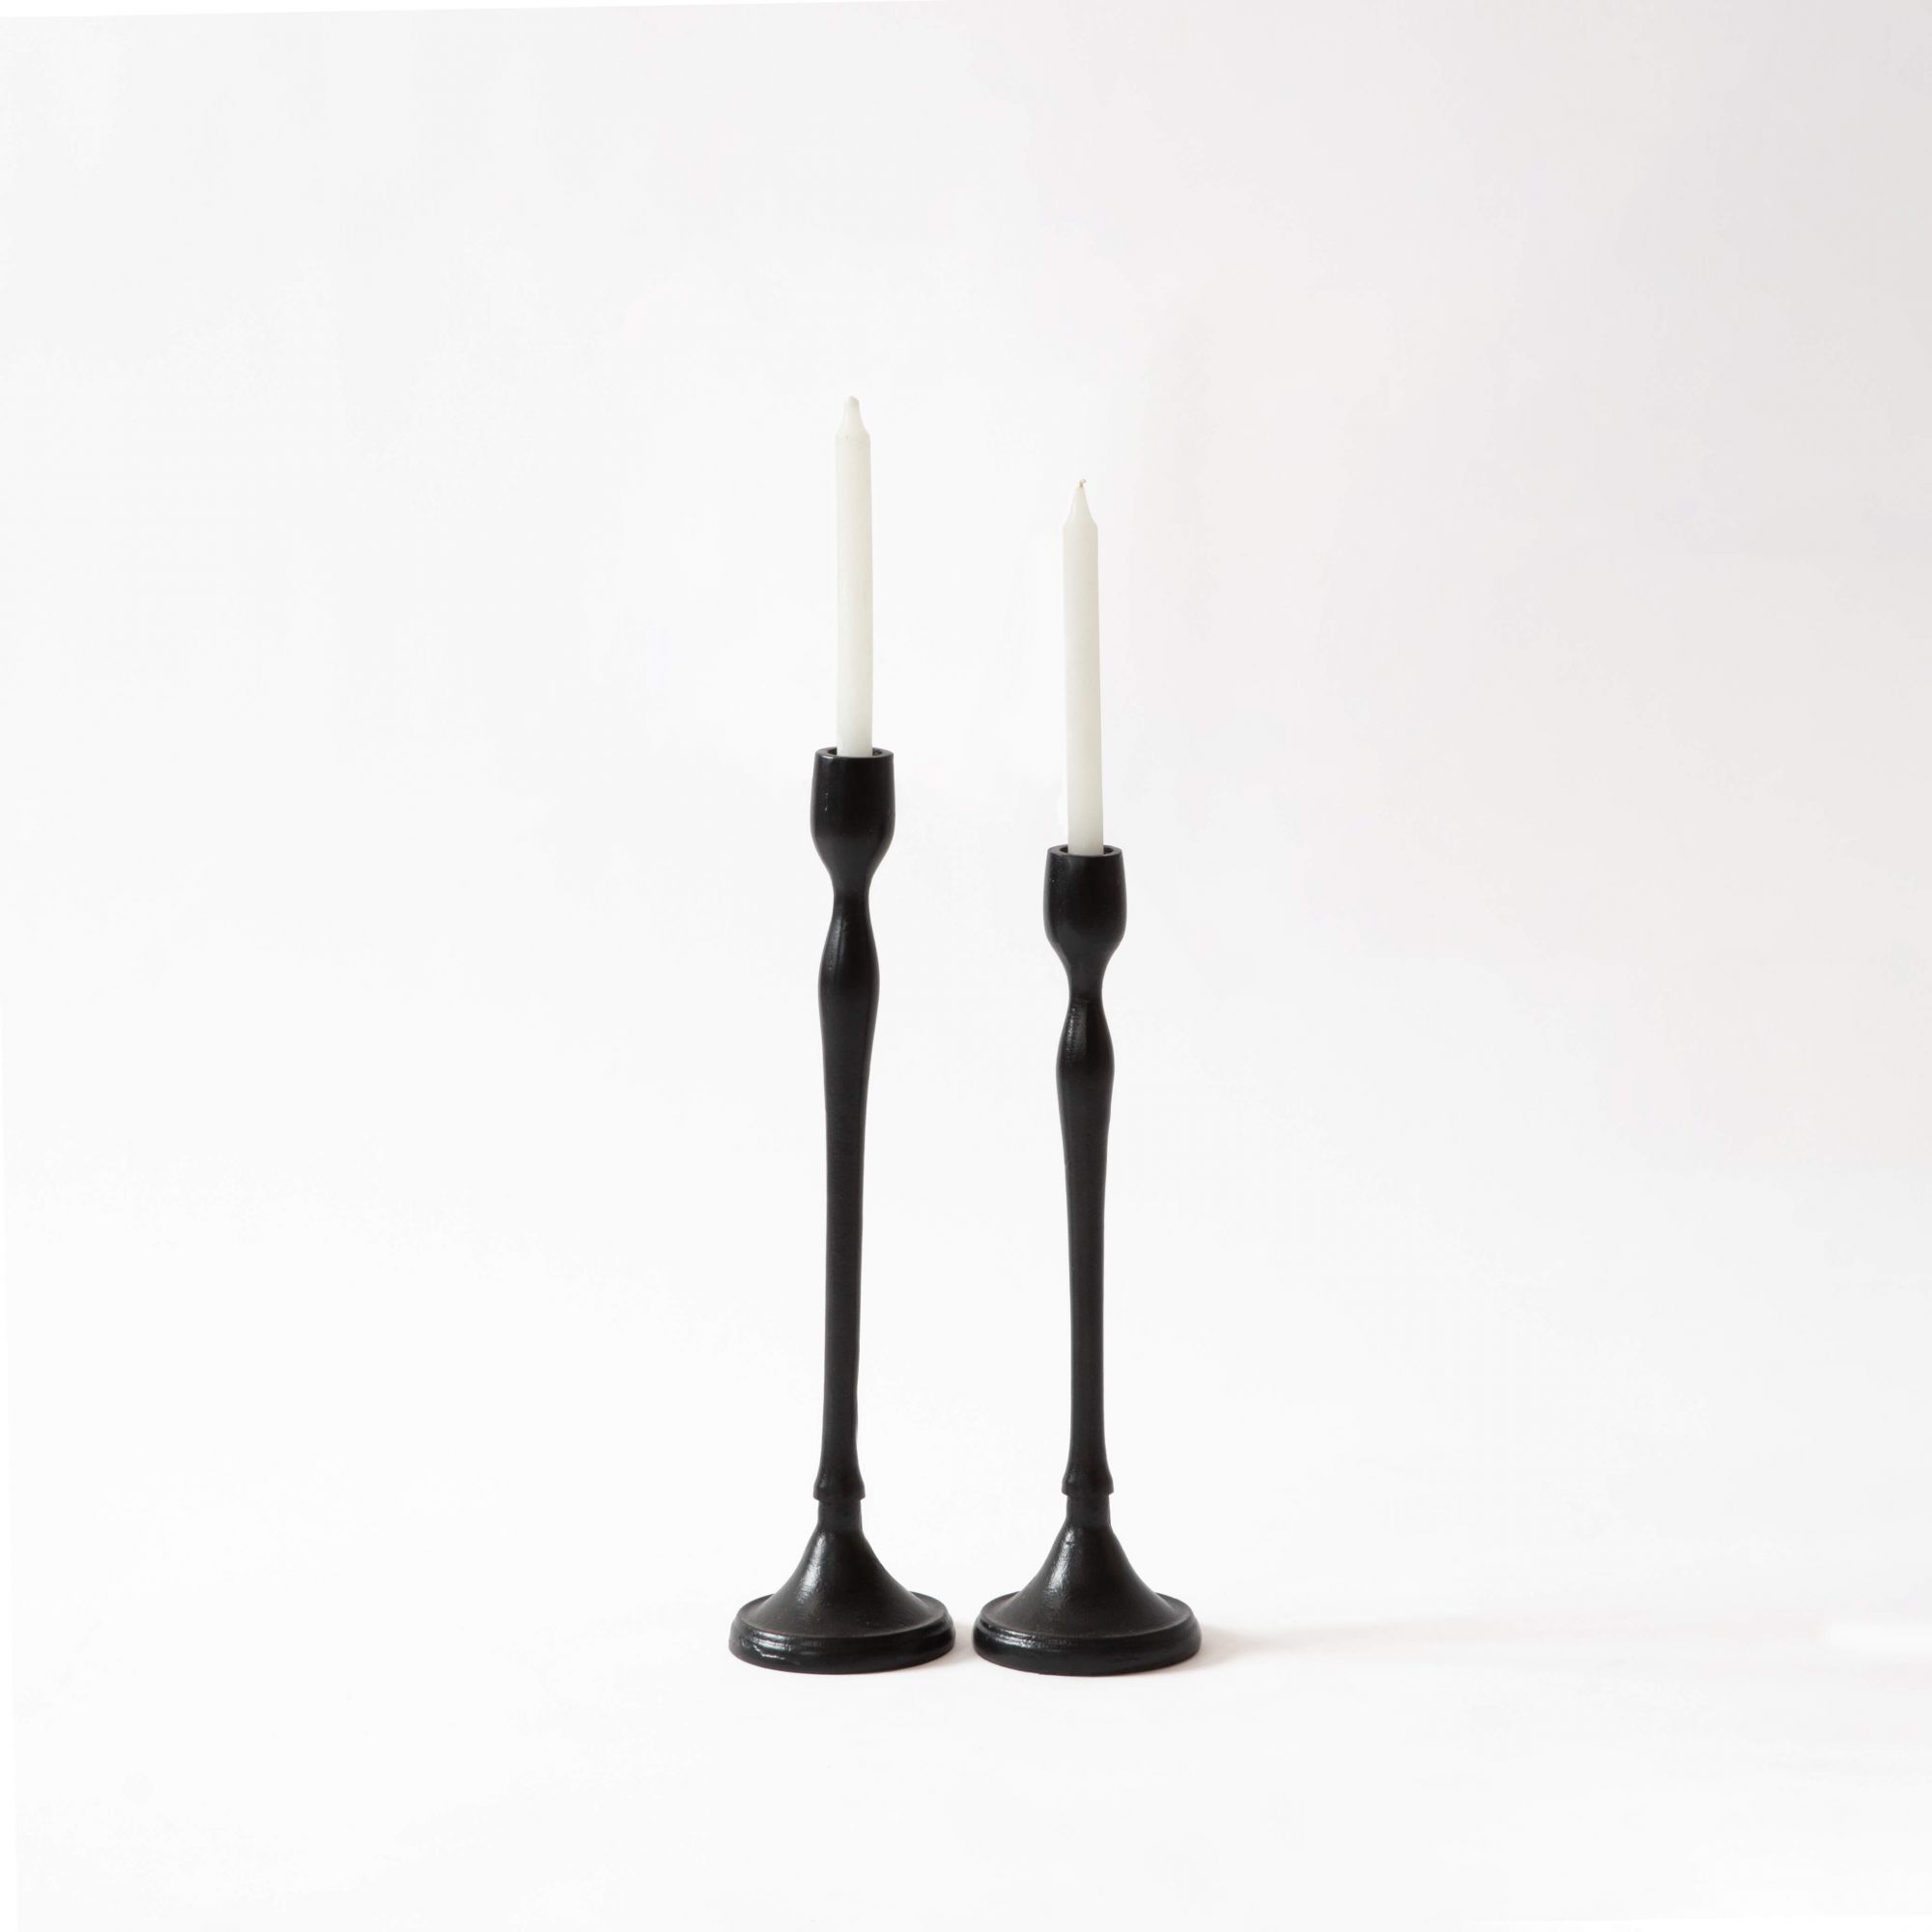 Sconce Candle Stand - Ebony